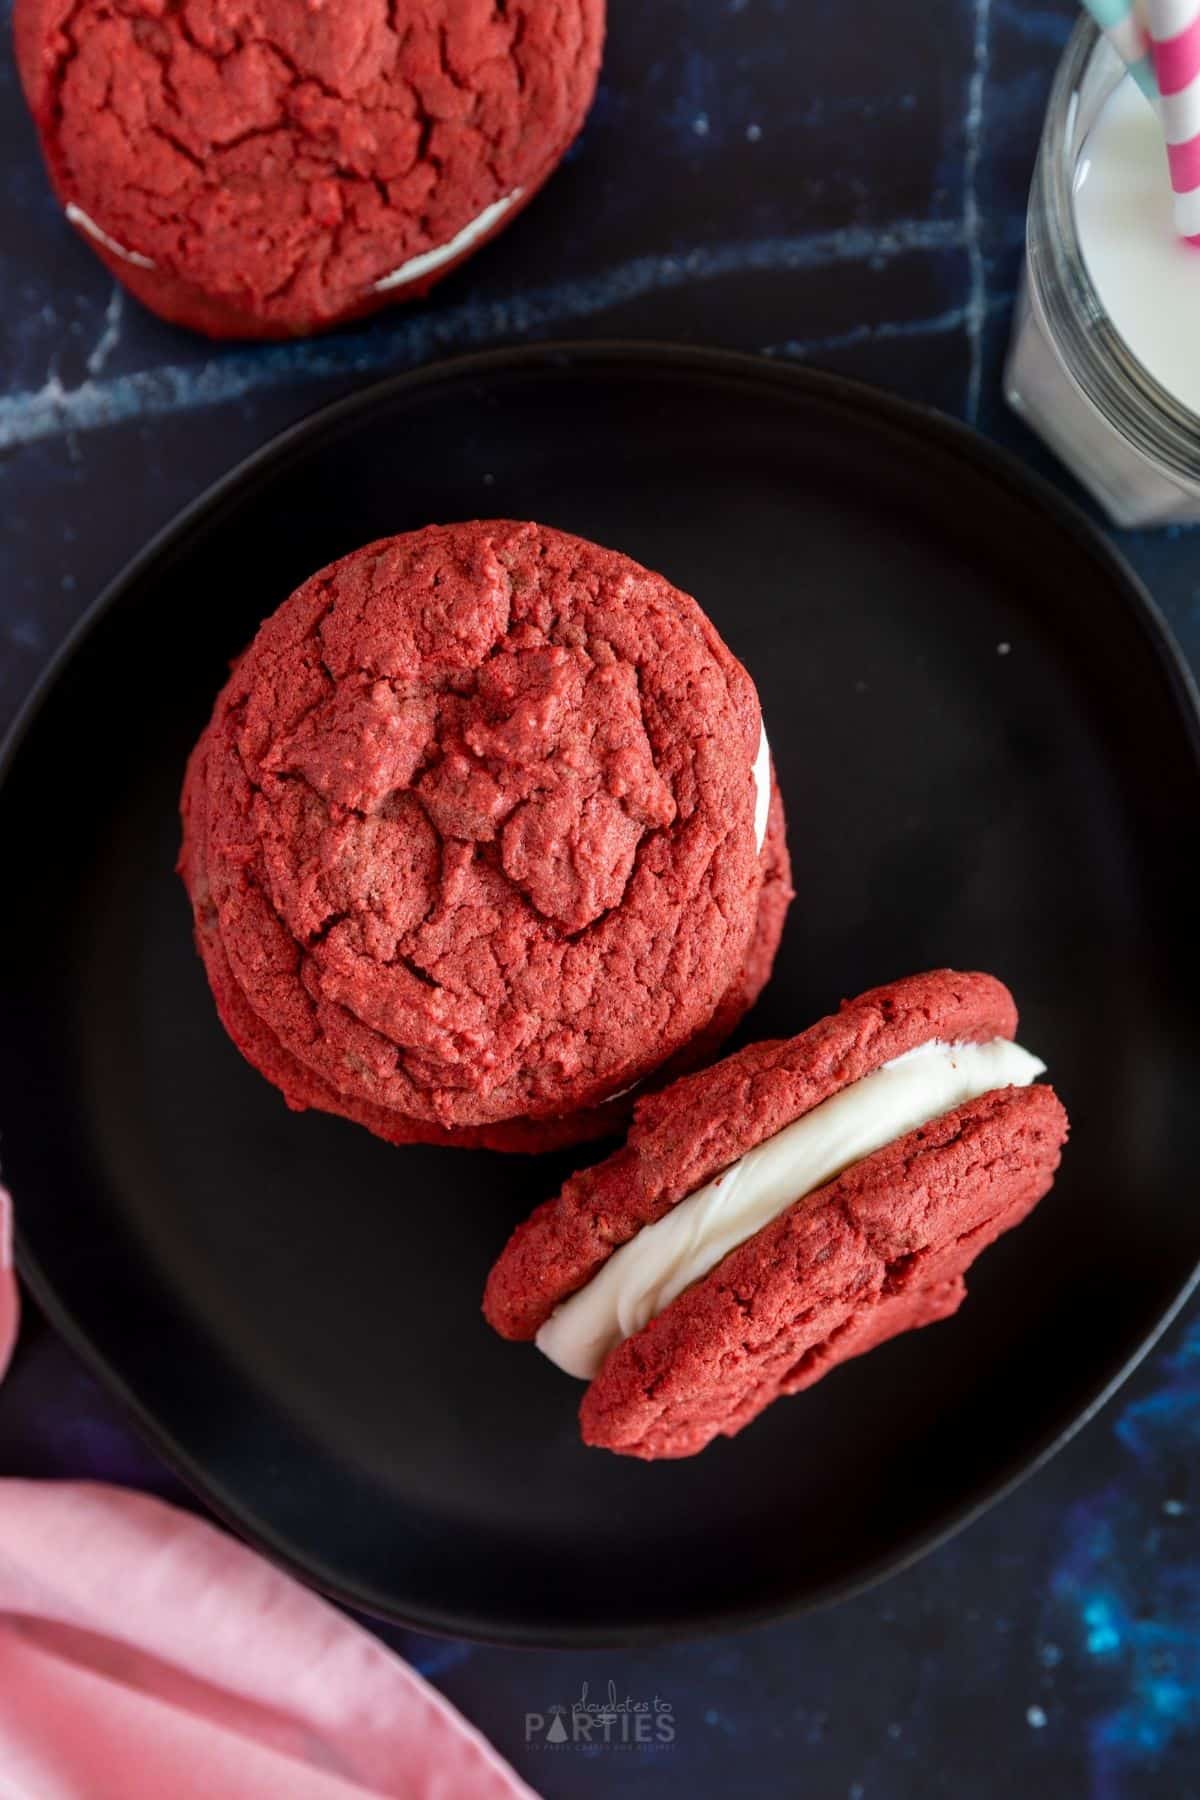 Overhead view of red cookies on a black plate.